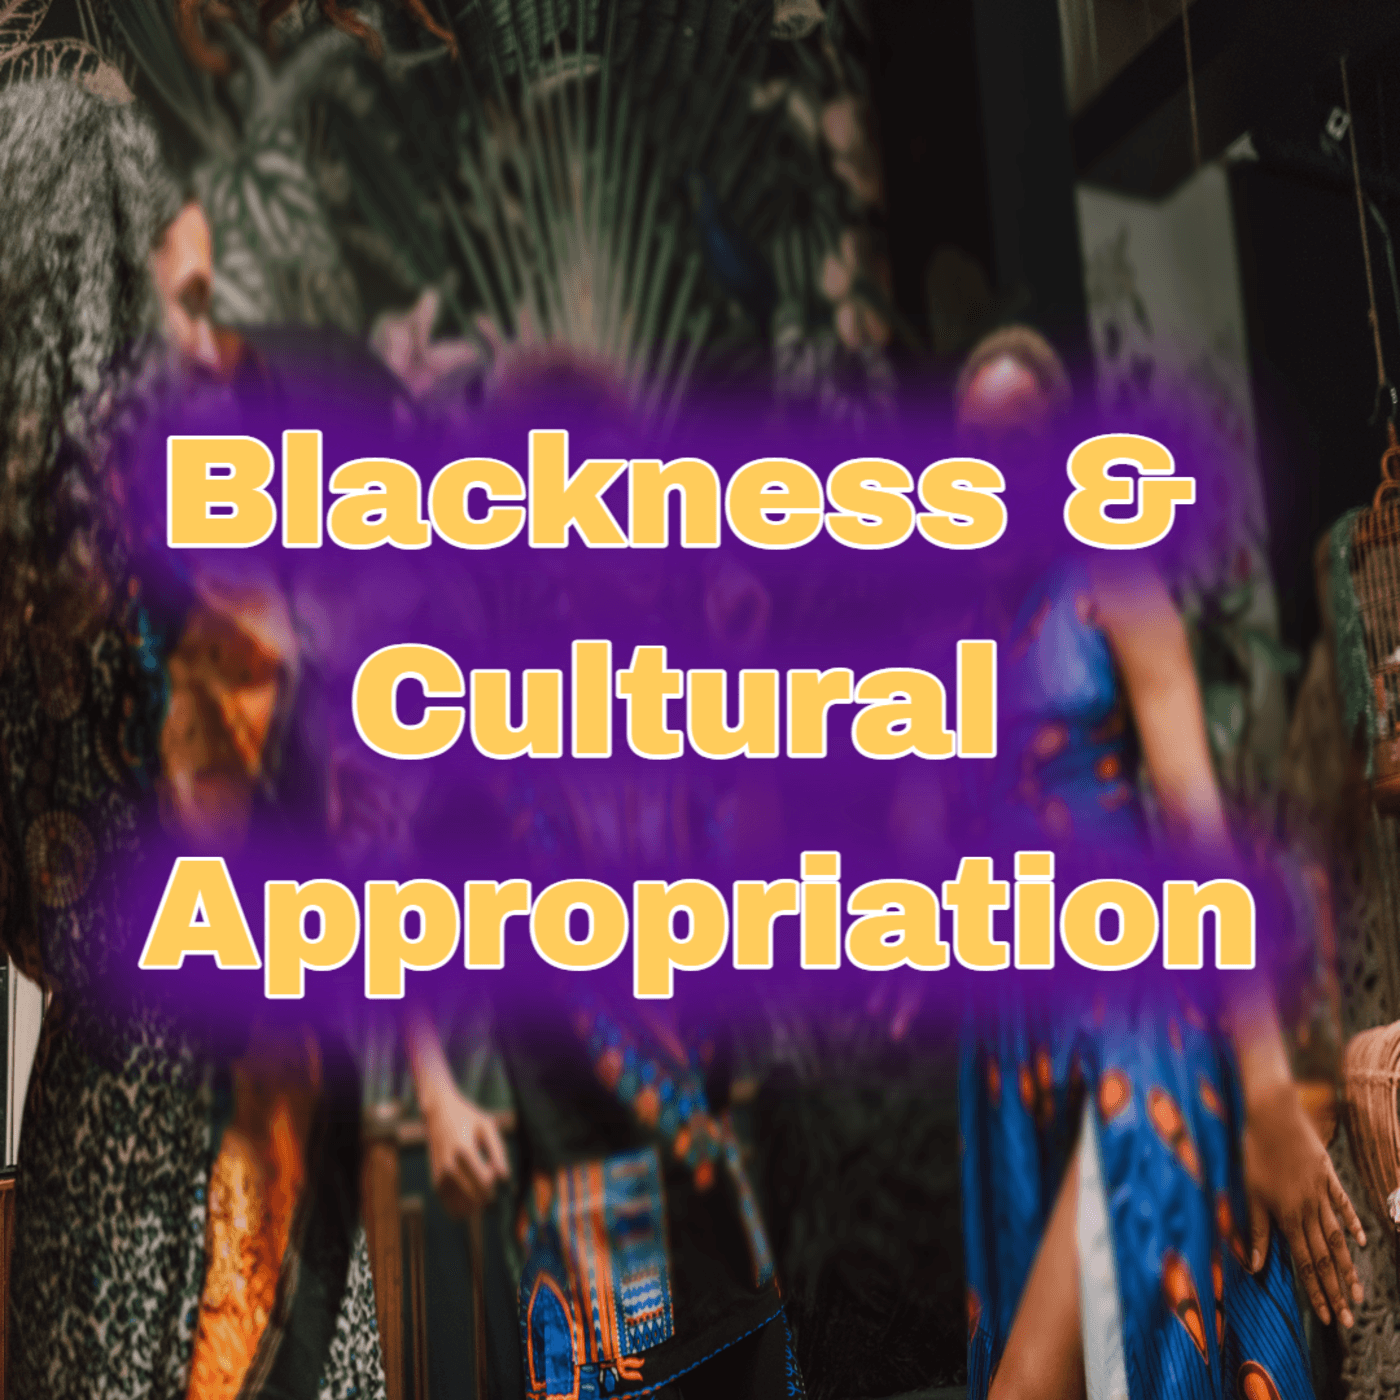 Thumbnail for "Blackness and Cultural Appropriation".